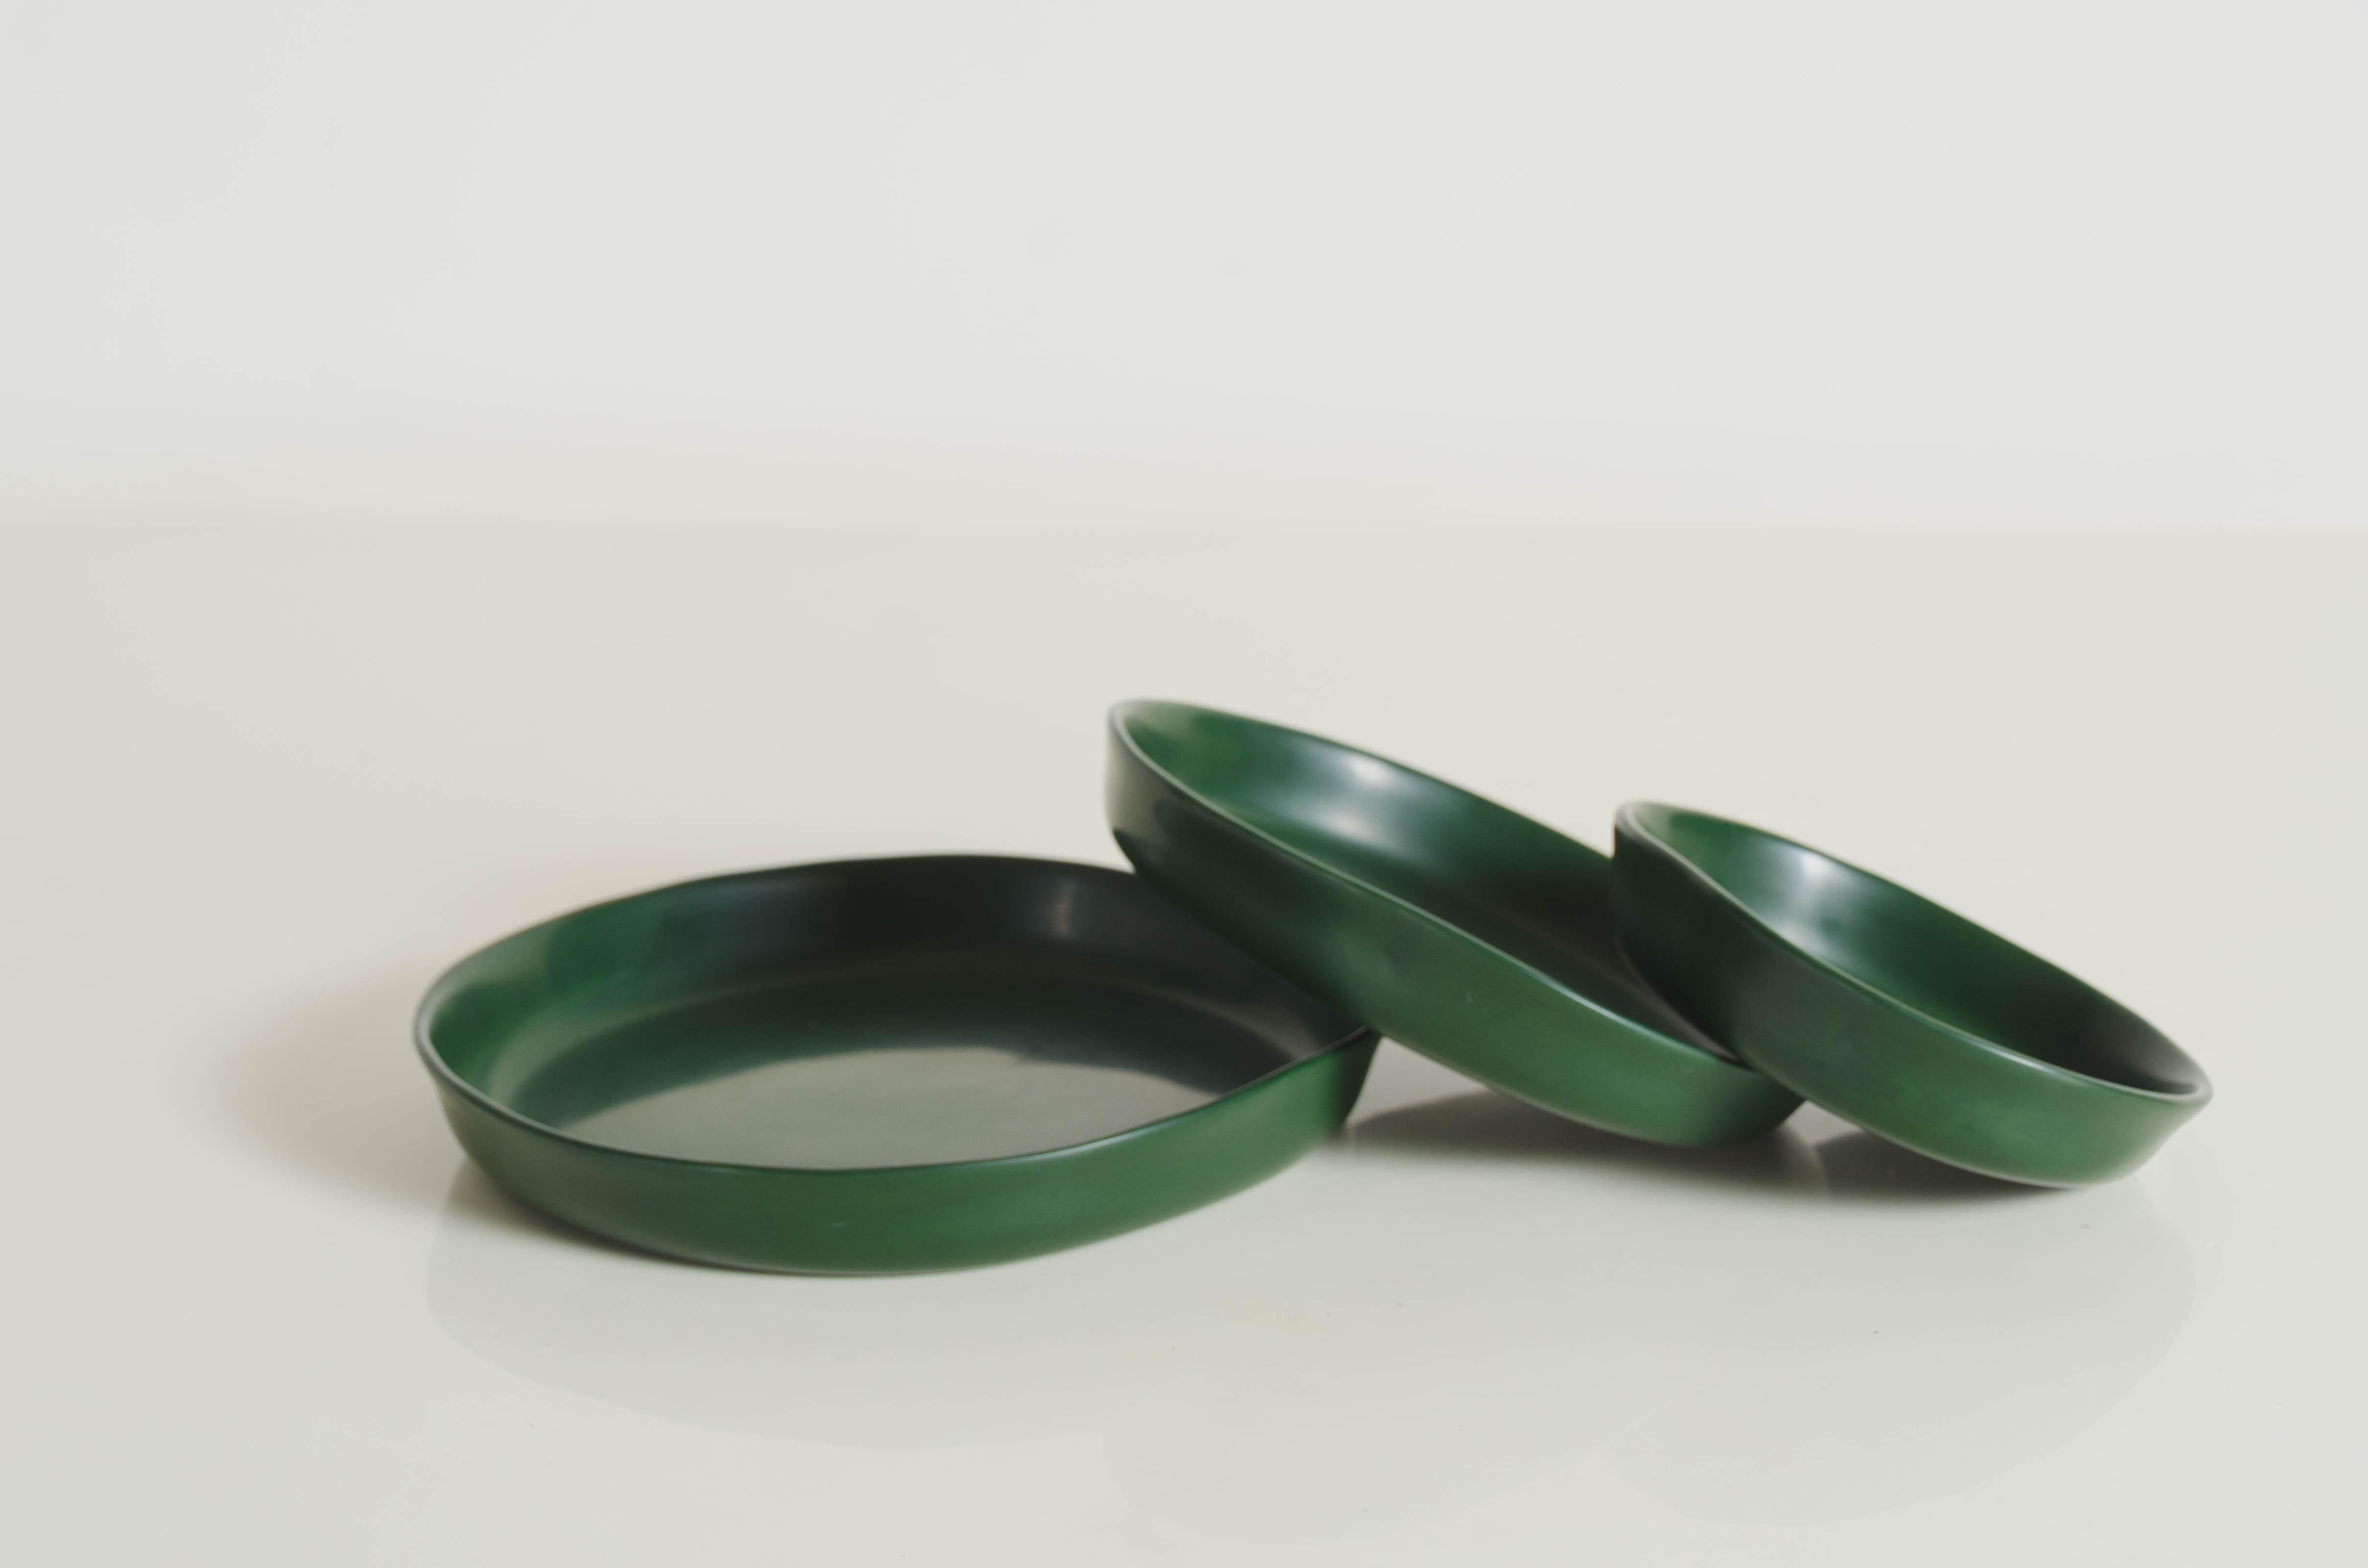 Round Plates, Set of 3, Green Lacquer by Robert Kuo, Handmade, Limited Edition For Sale 1